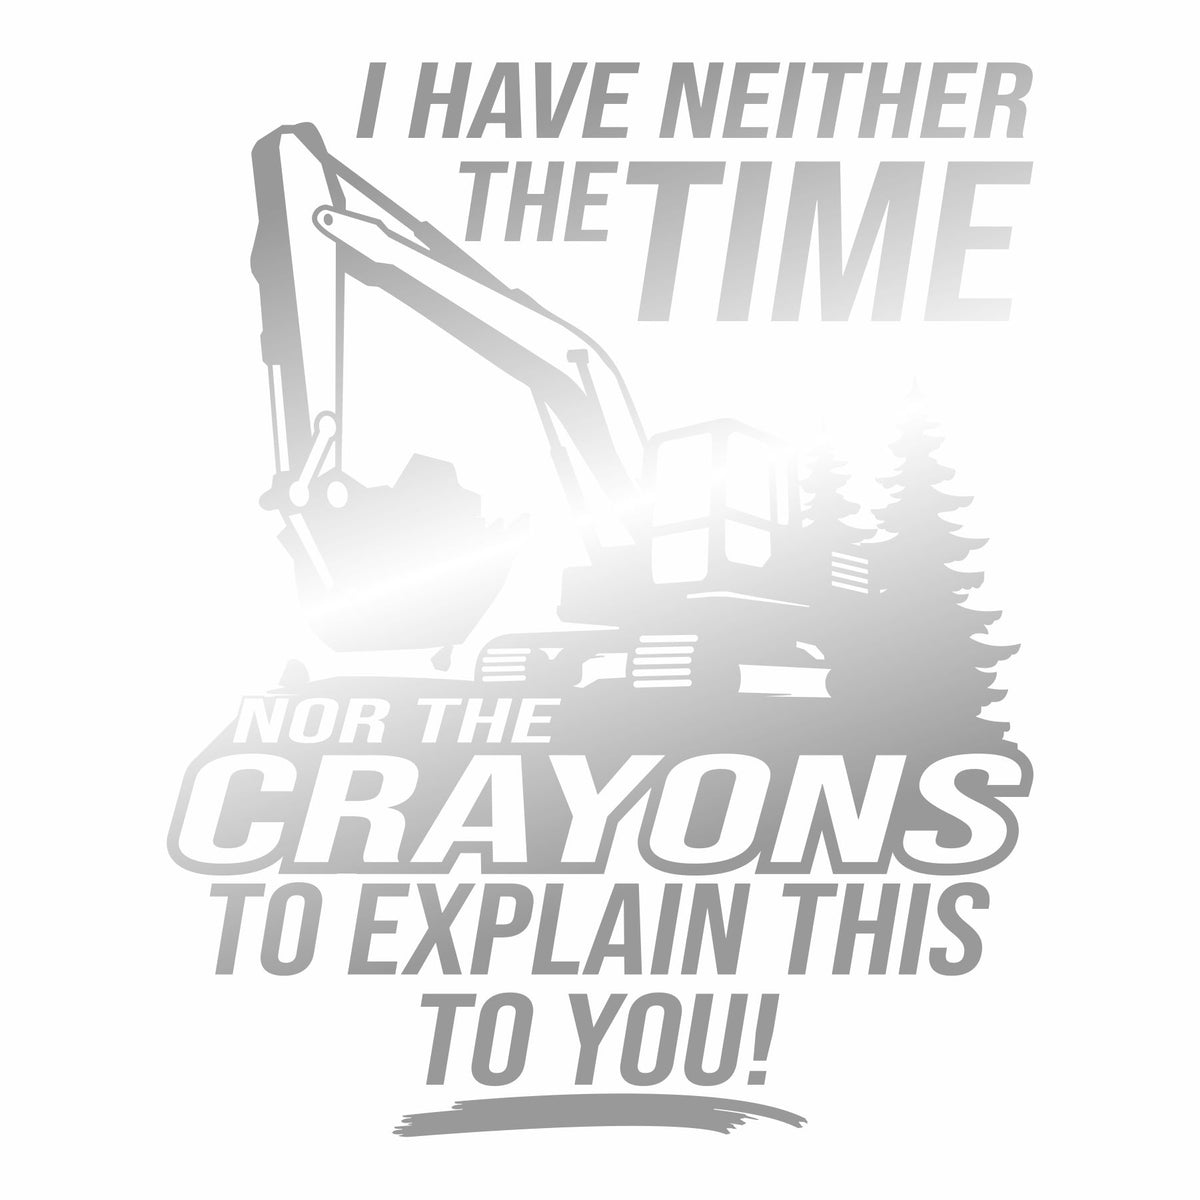 I Have Neither Time Nor Crayons - Excavator - Vinyl Decal - Free Shipping